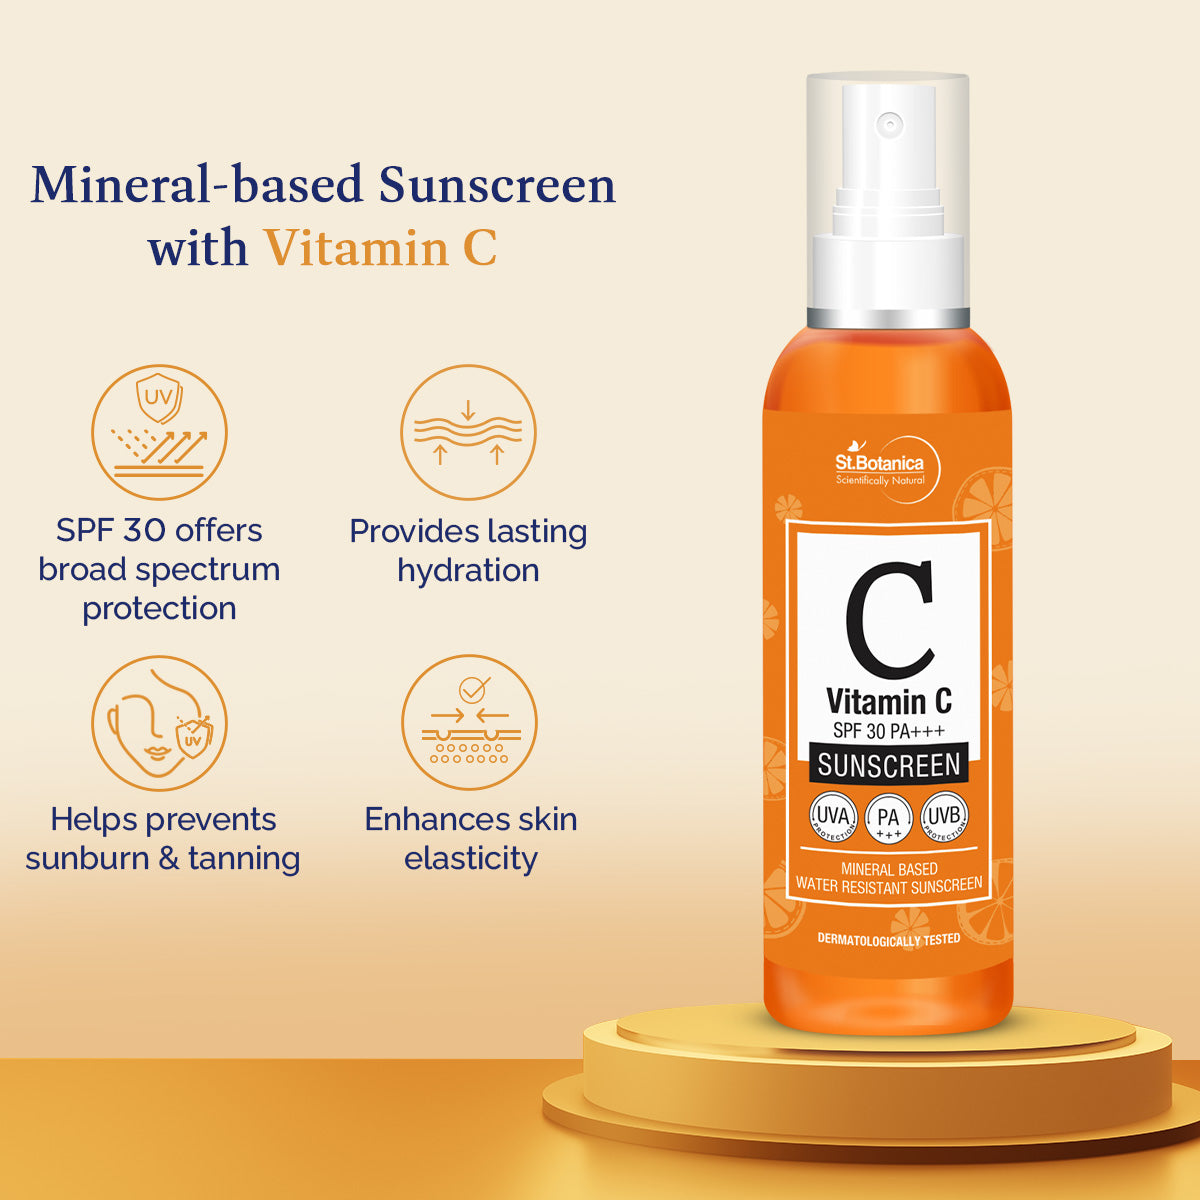 St.Botanica Vitamin C SPF 30 Pa+++ Sunscreen Oil Mineral Based and Water Resistant, UVA and UVB Protection, 120 ml